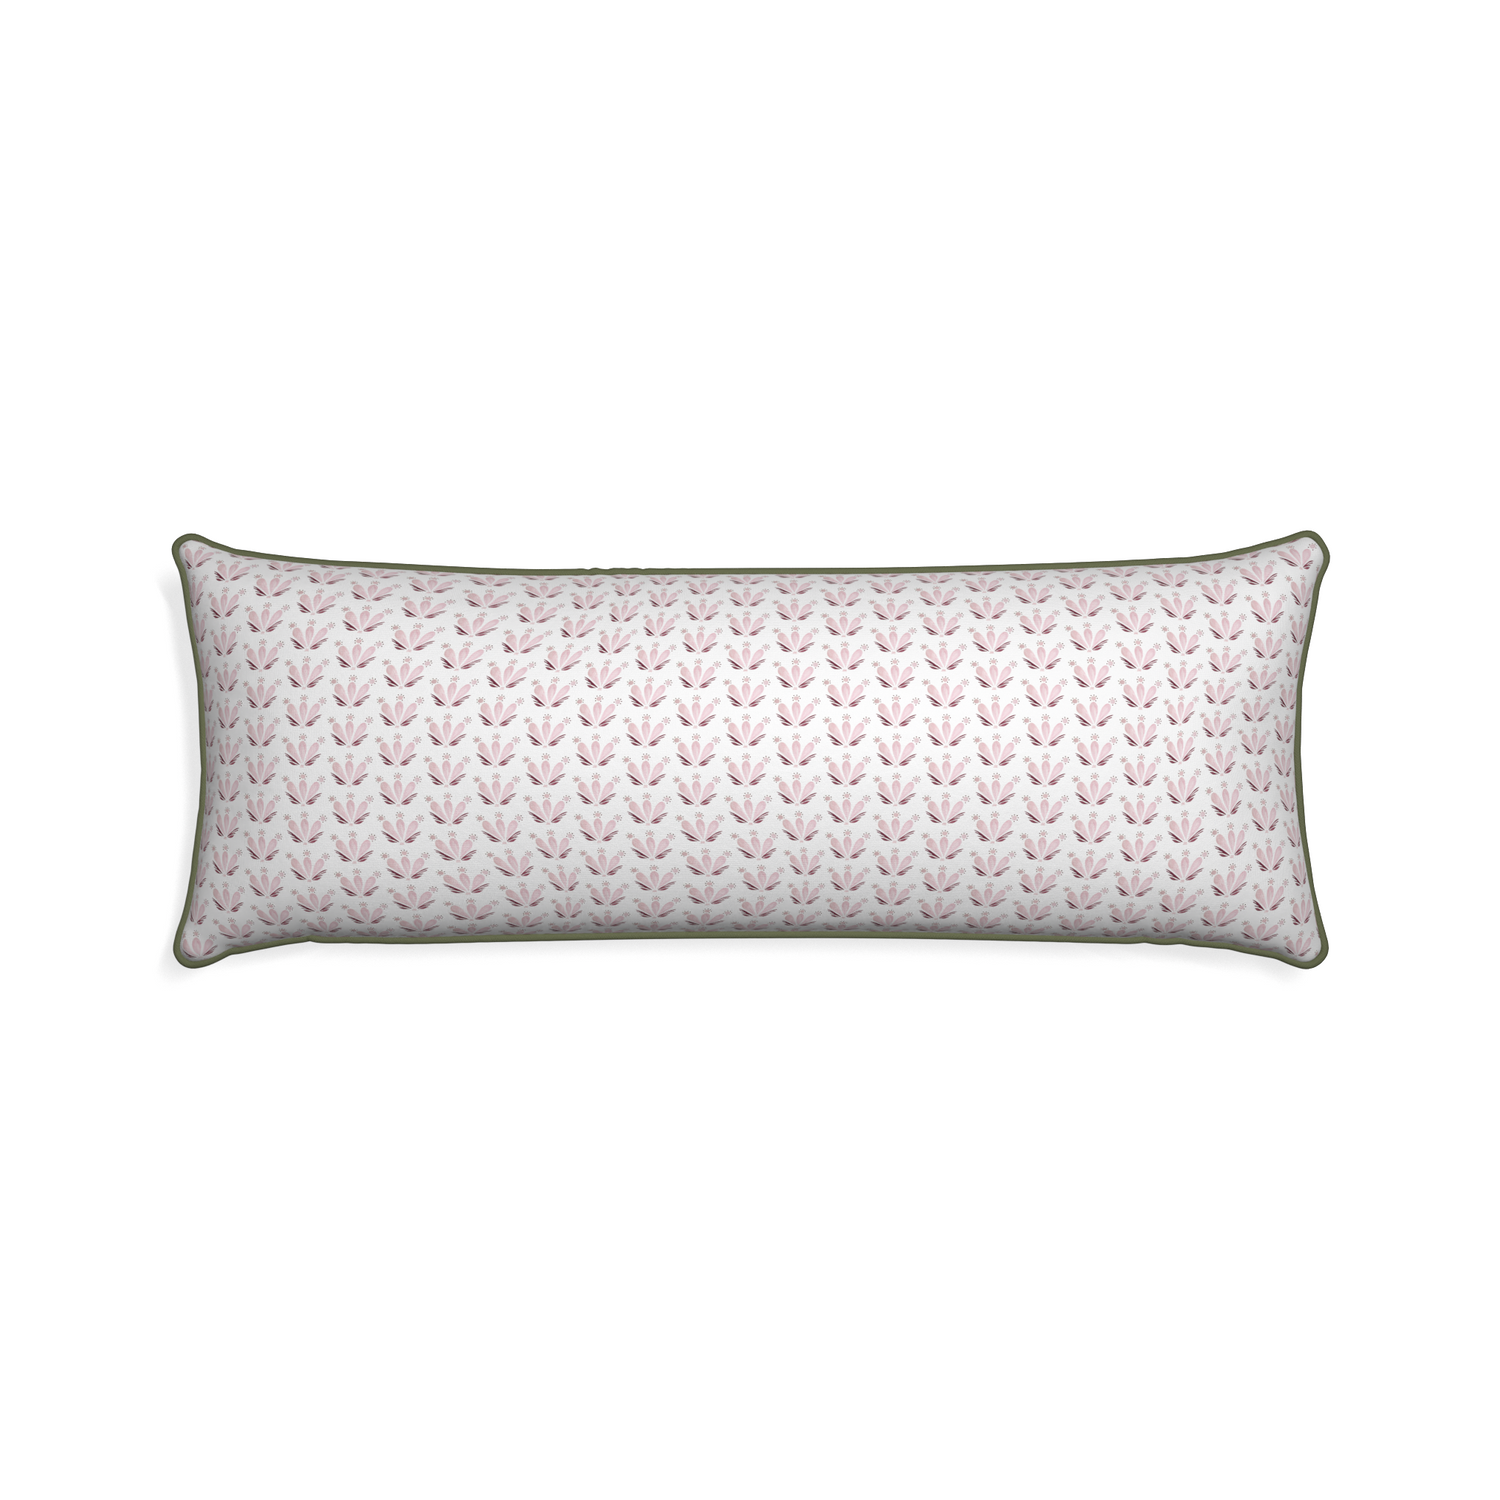 Xl-lumbar serena pink custom pillow with f piping on white background